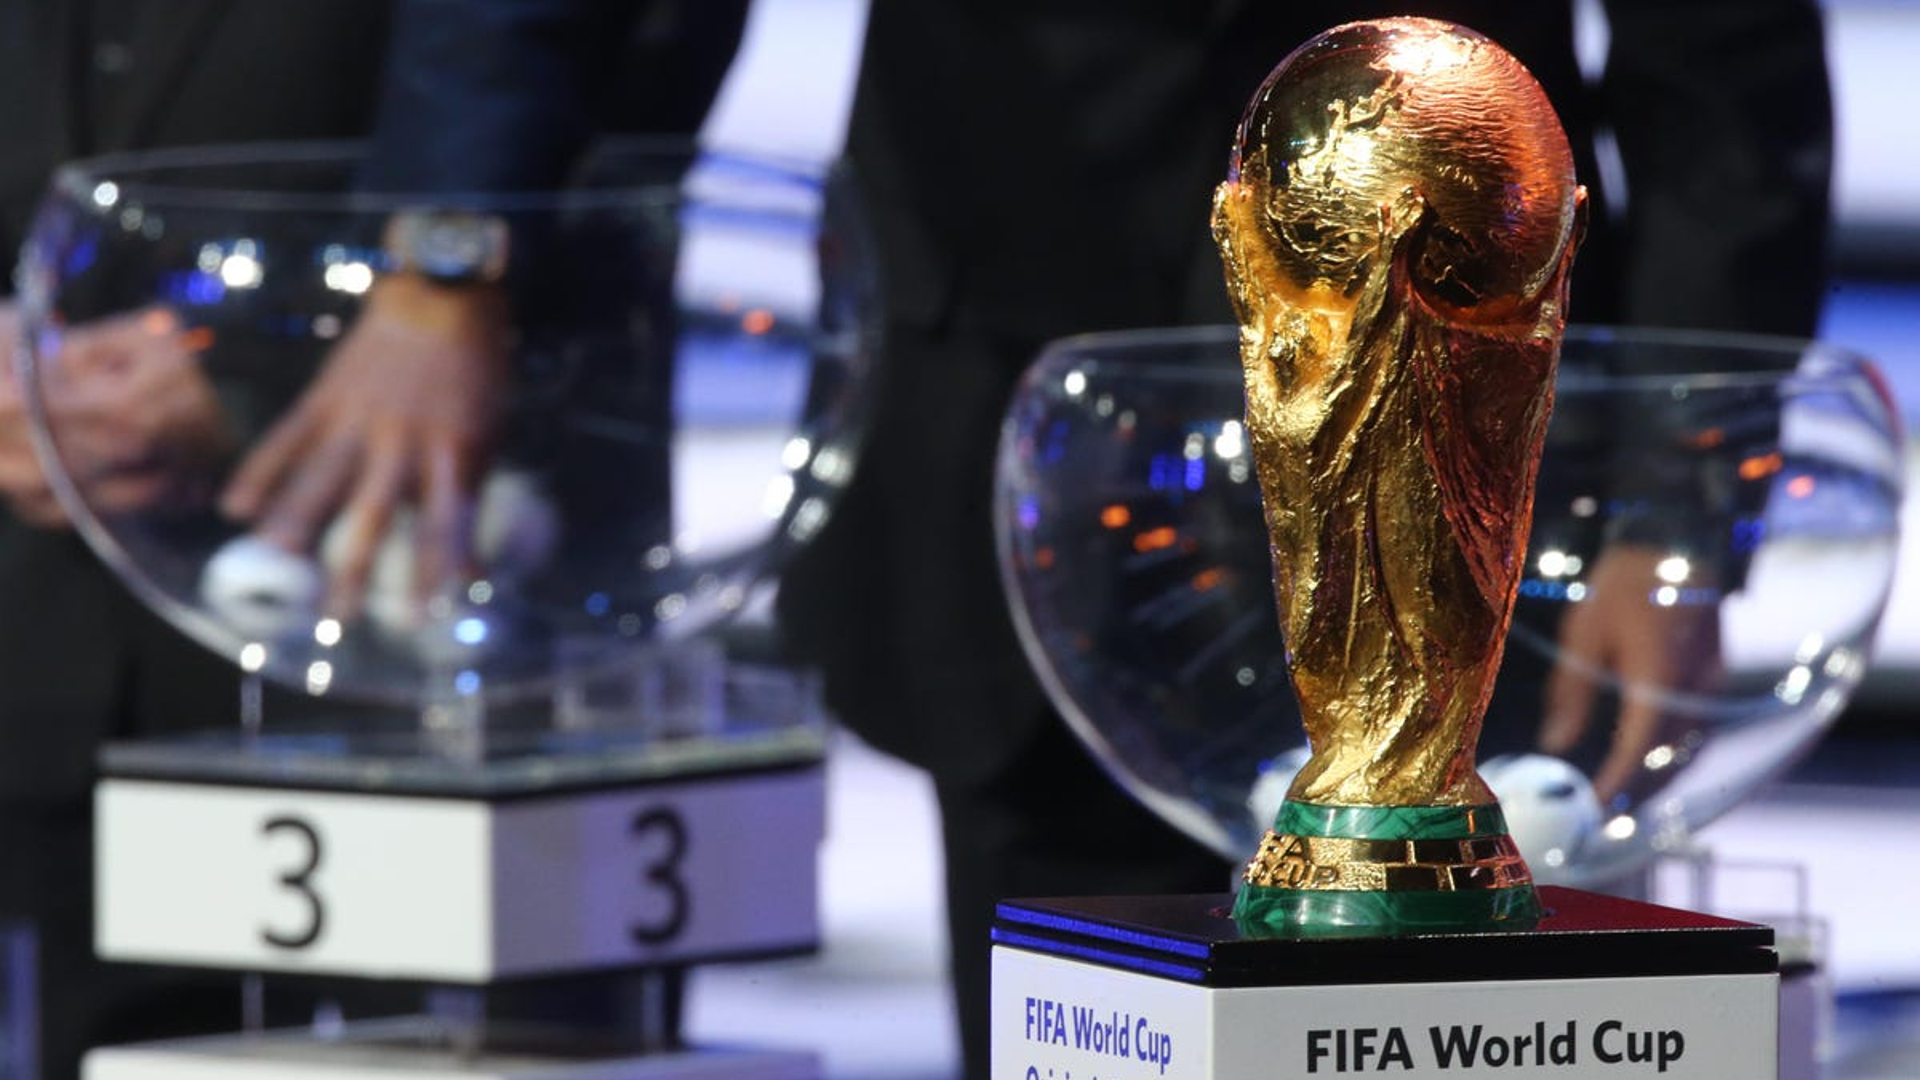 All set for FIFA World Cup Draw tomorrow April Fool's Day 2022